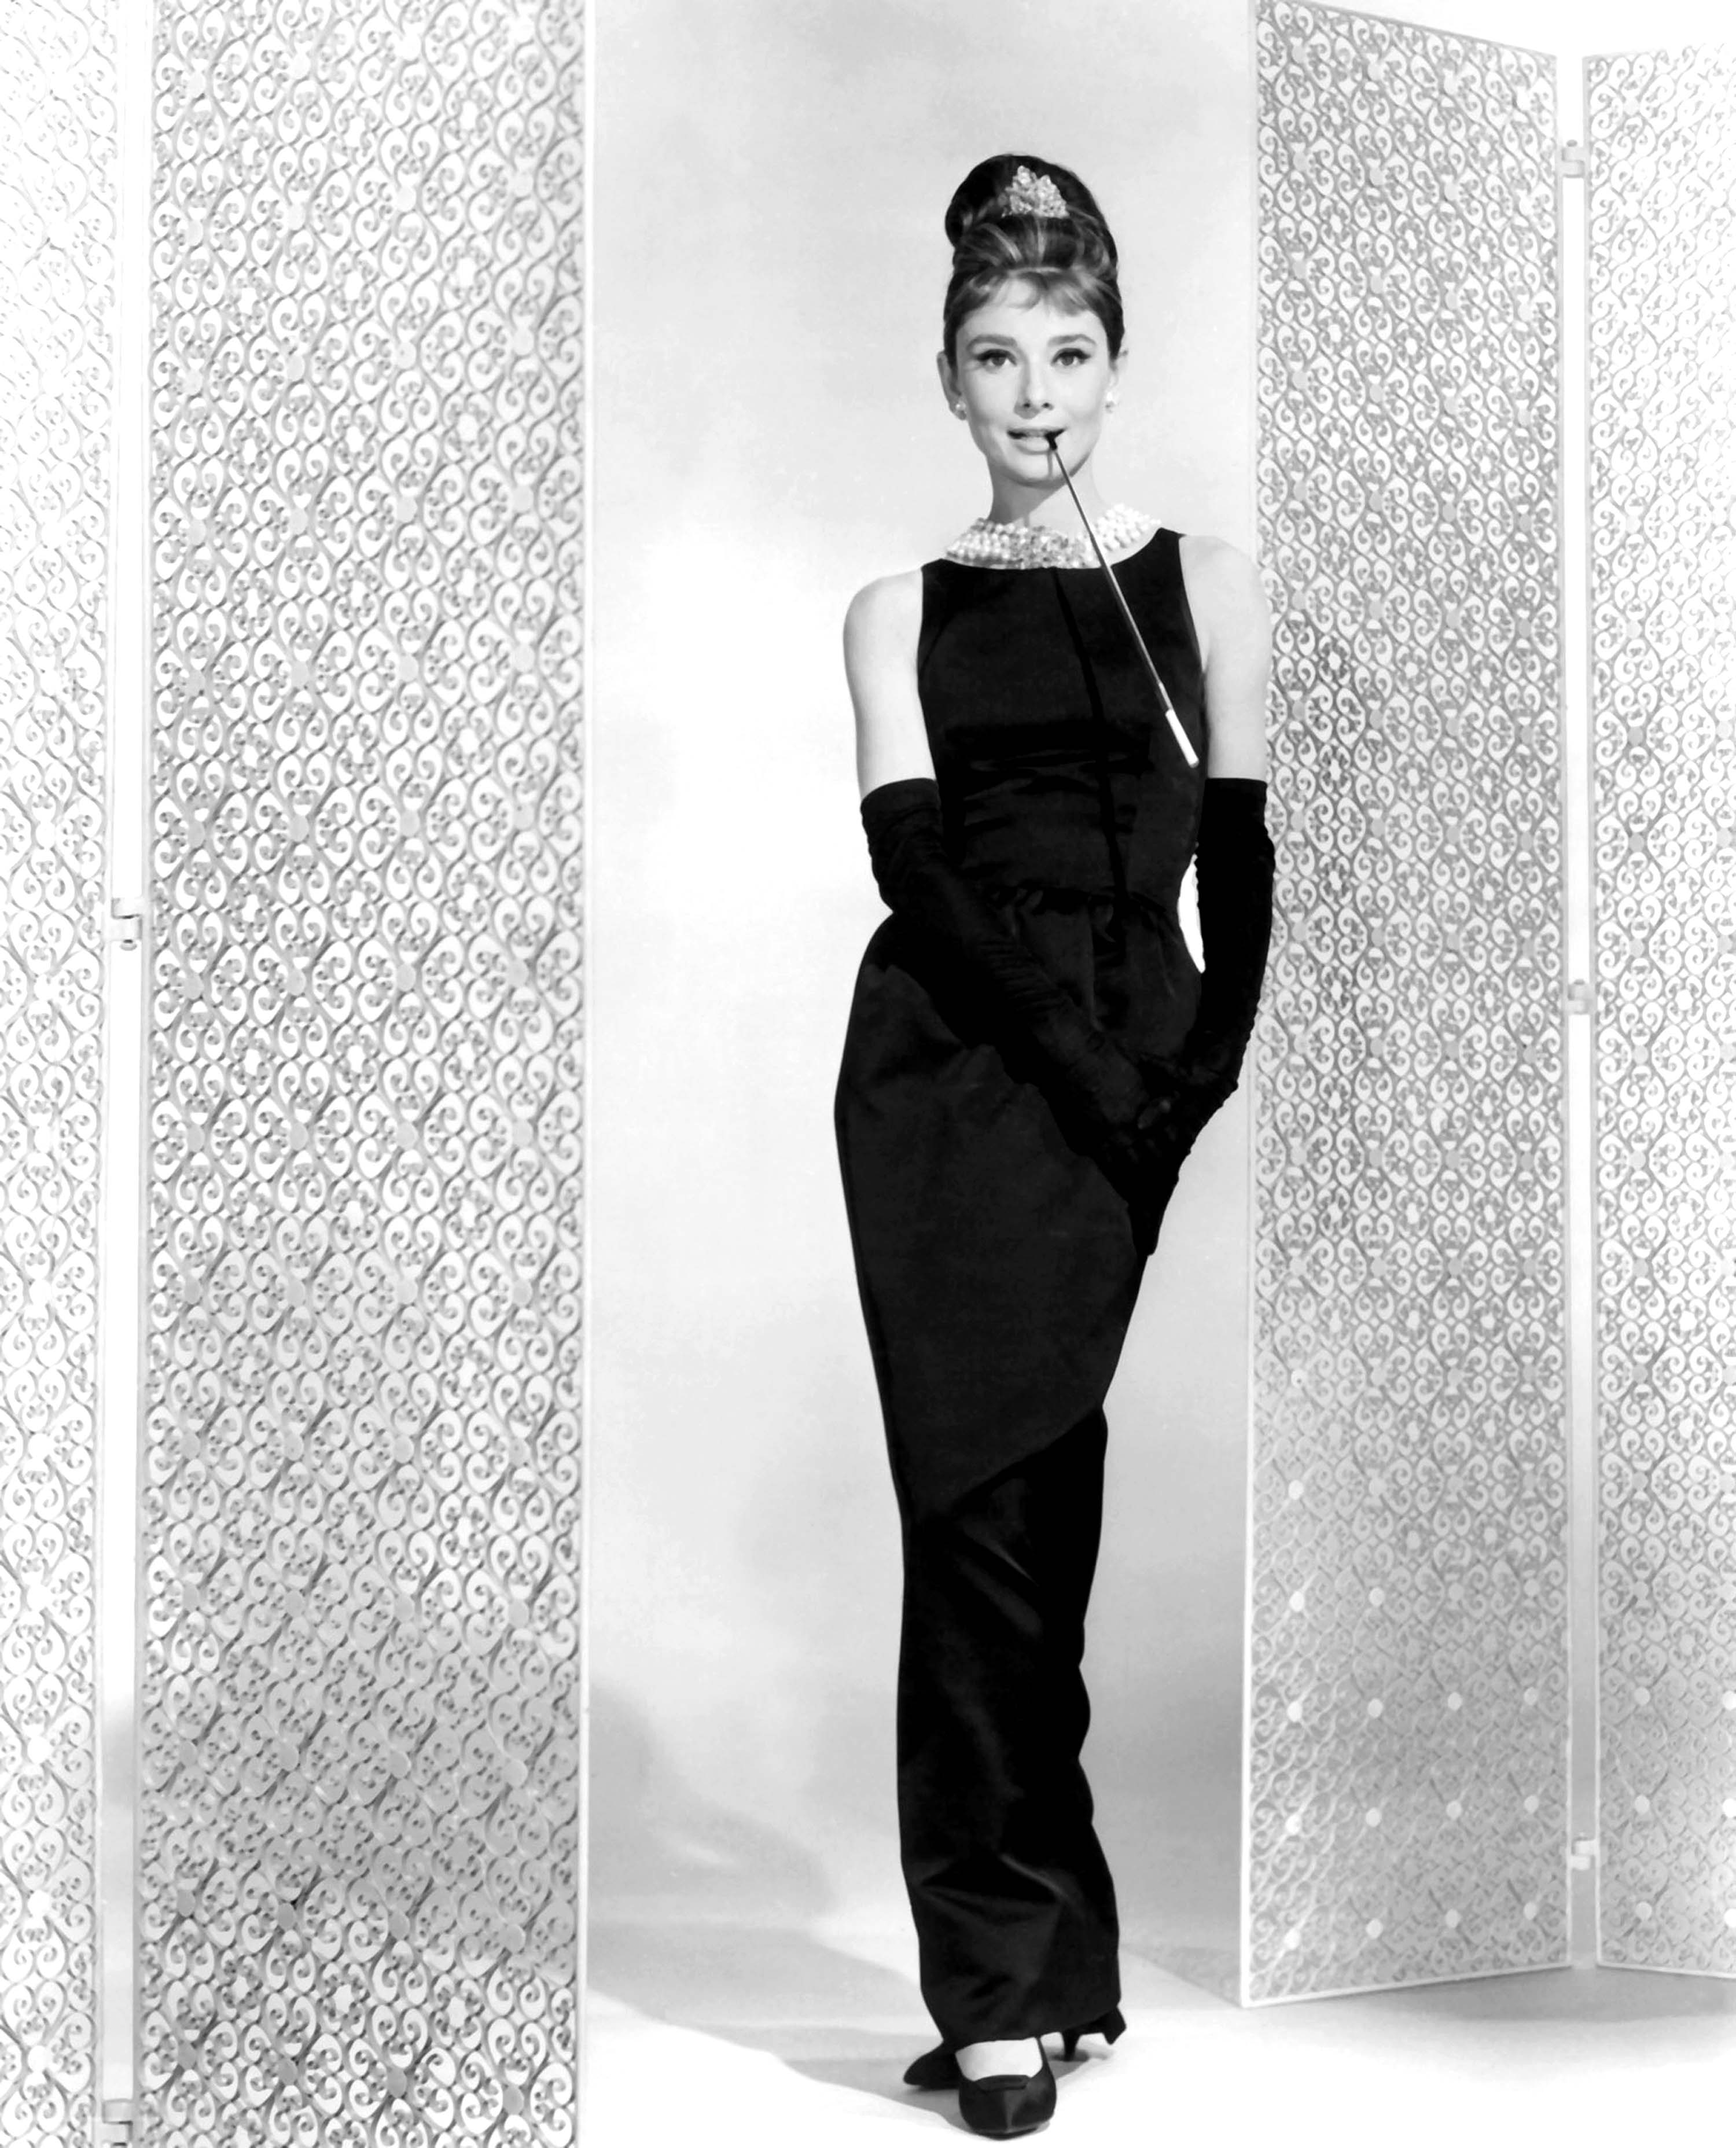 The Story Behind That Little Black Dress Worn By Audrey Hepburn In ...